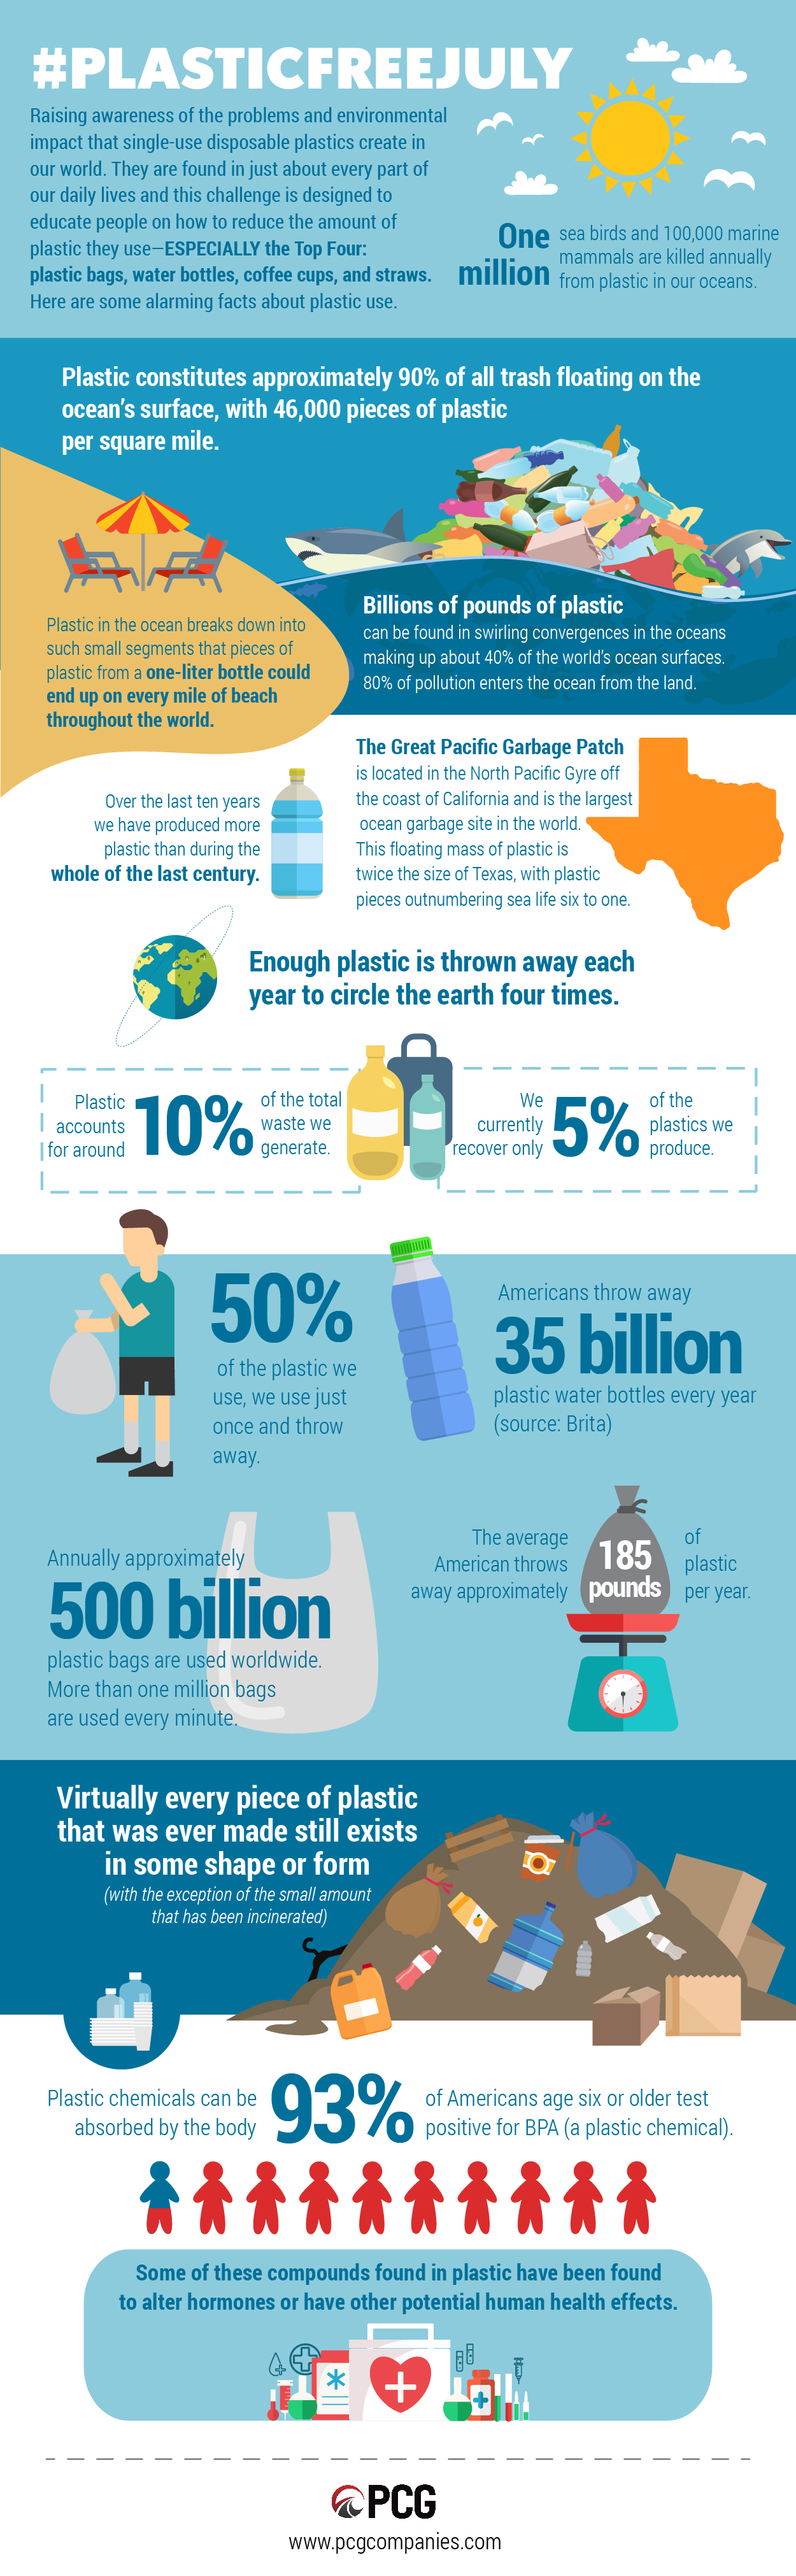 plastic-free-july-infographic